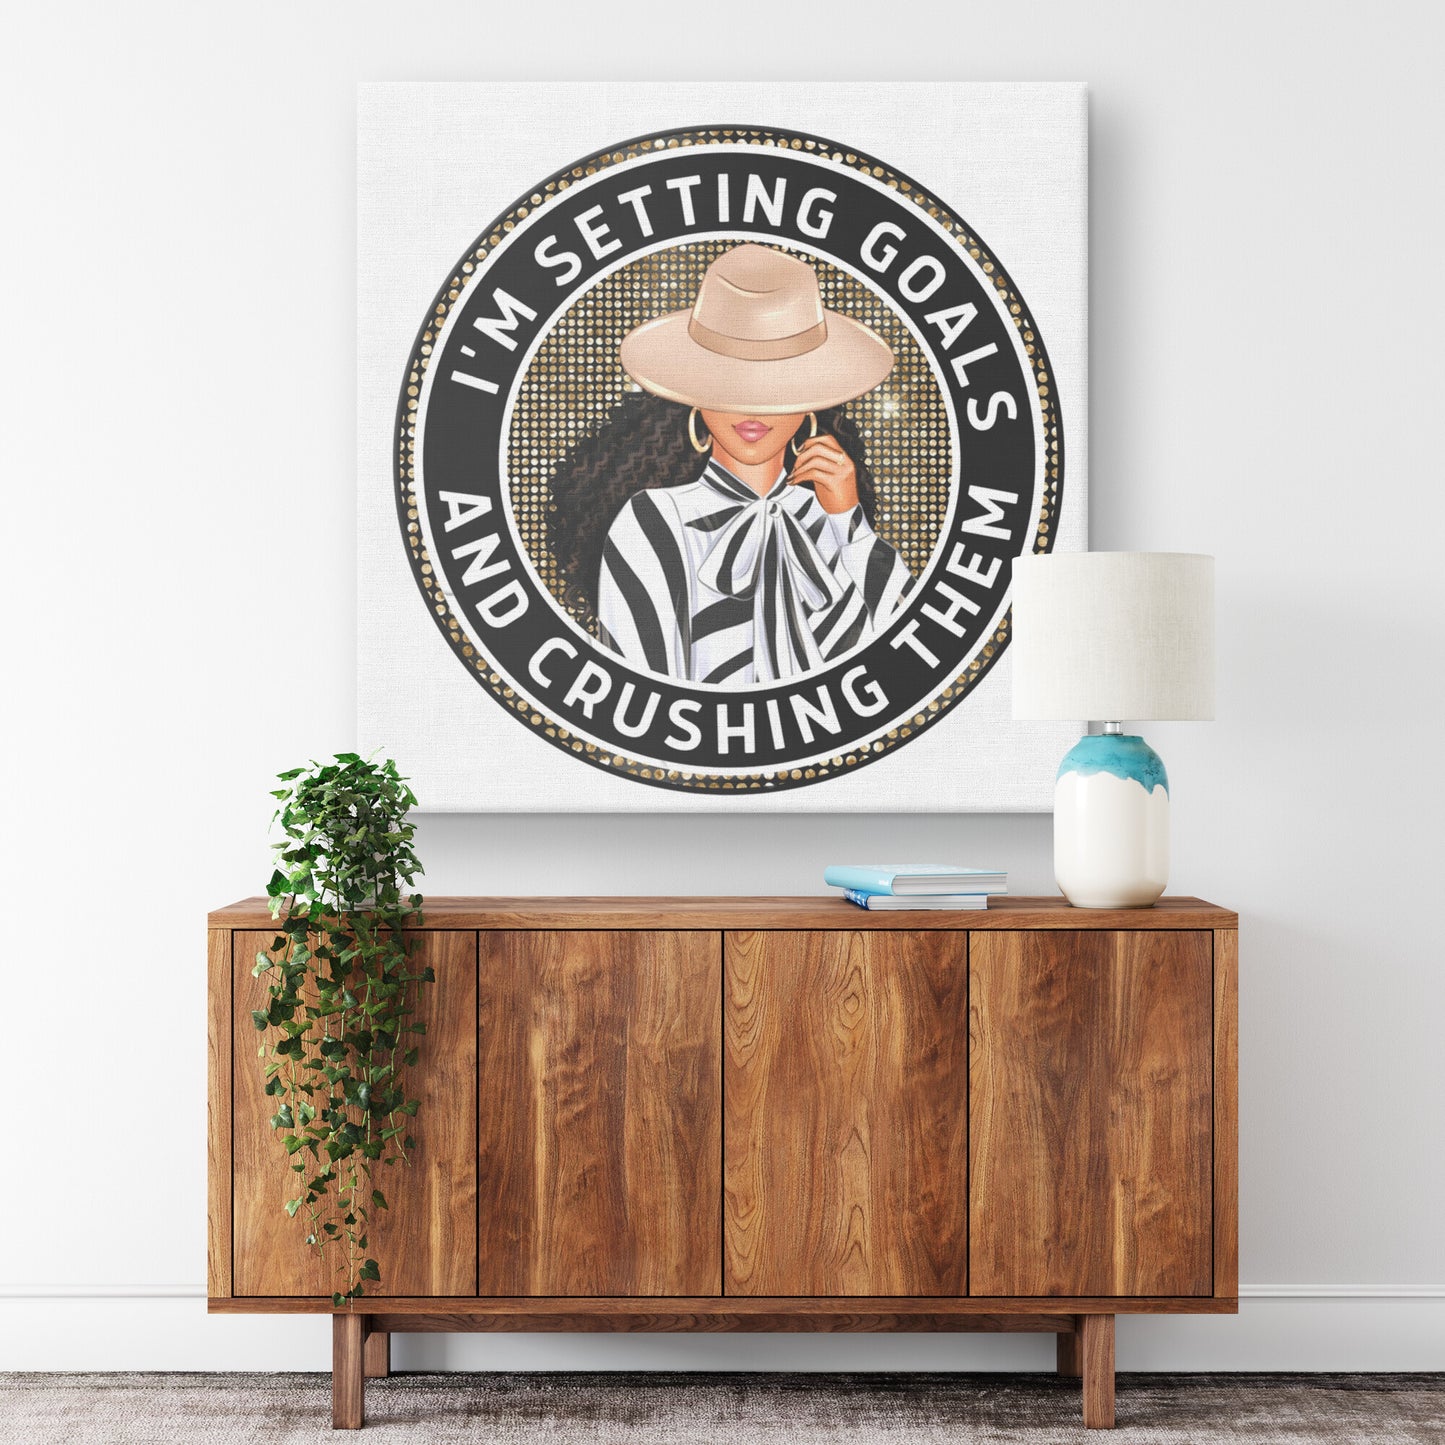 Setting Goals and Crushing Them Canvas,Canva Wall Art , Canva Posters , Modern Wall Art